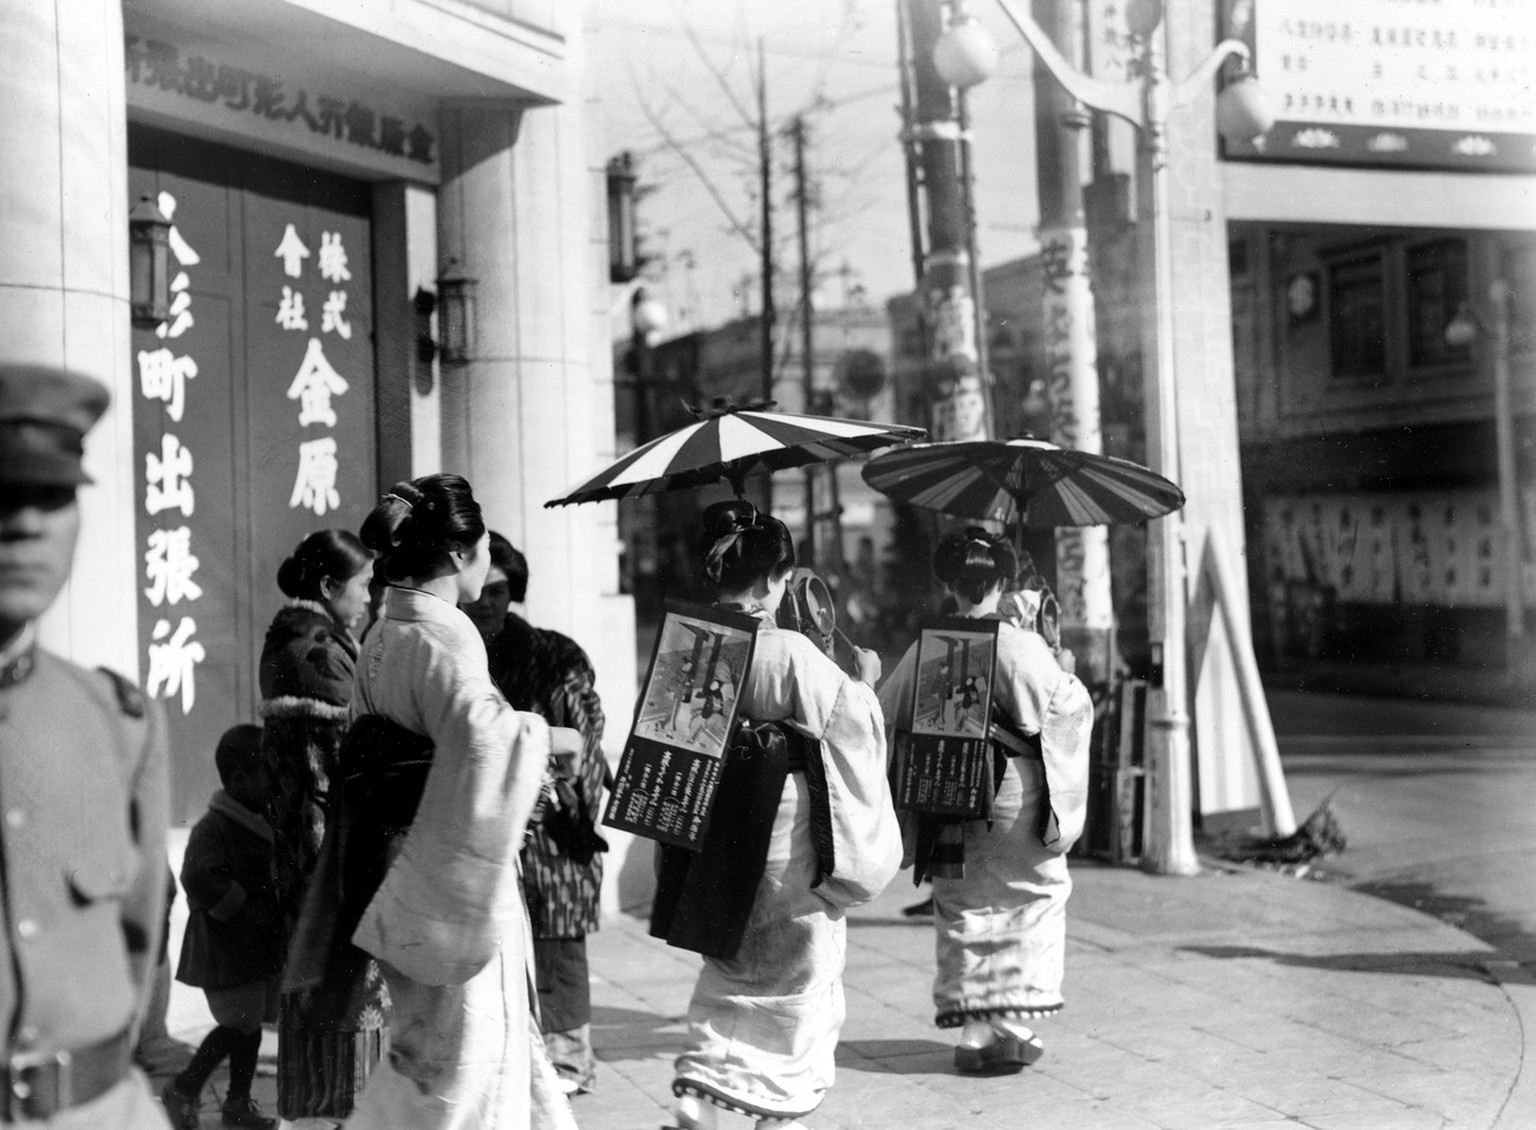 Japanese women wearing traditional costume parade as walking advertisments and beat drums to call attention to their ads through the streets of Tokyo, Japan, March 8, 1937. (AP Photo)